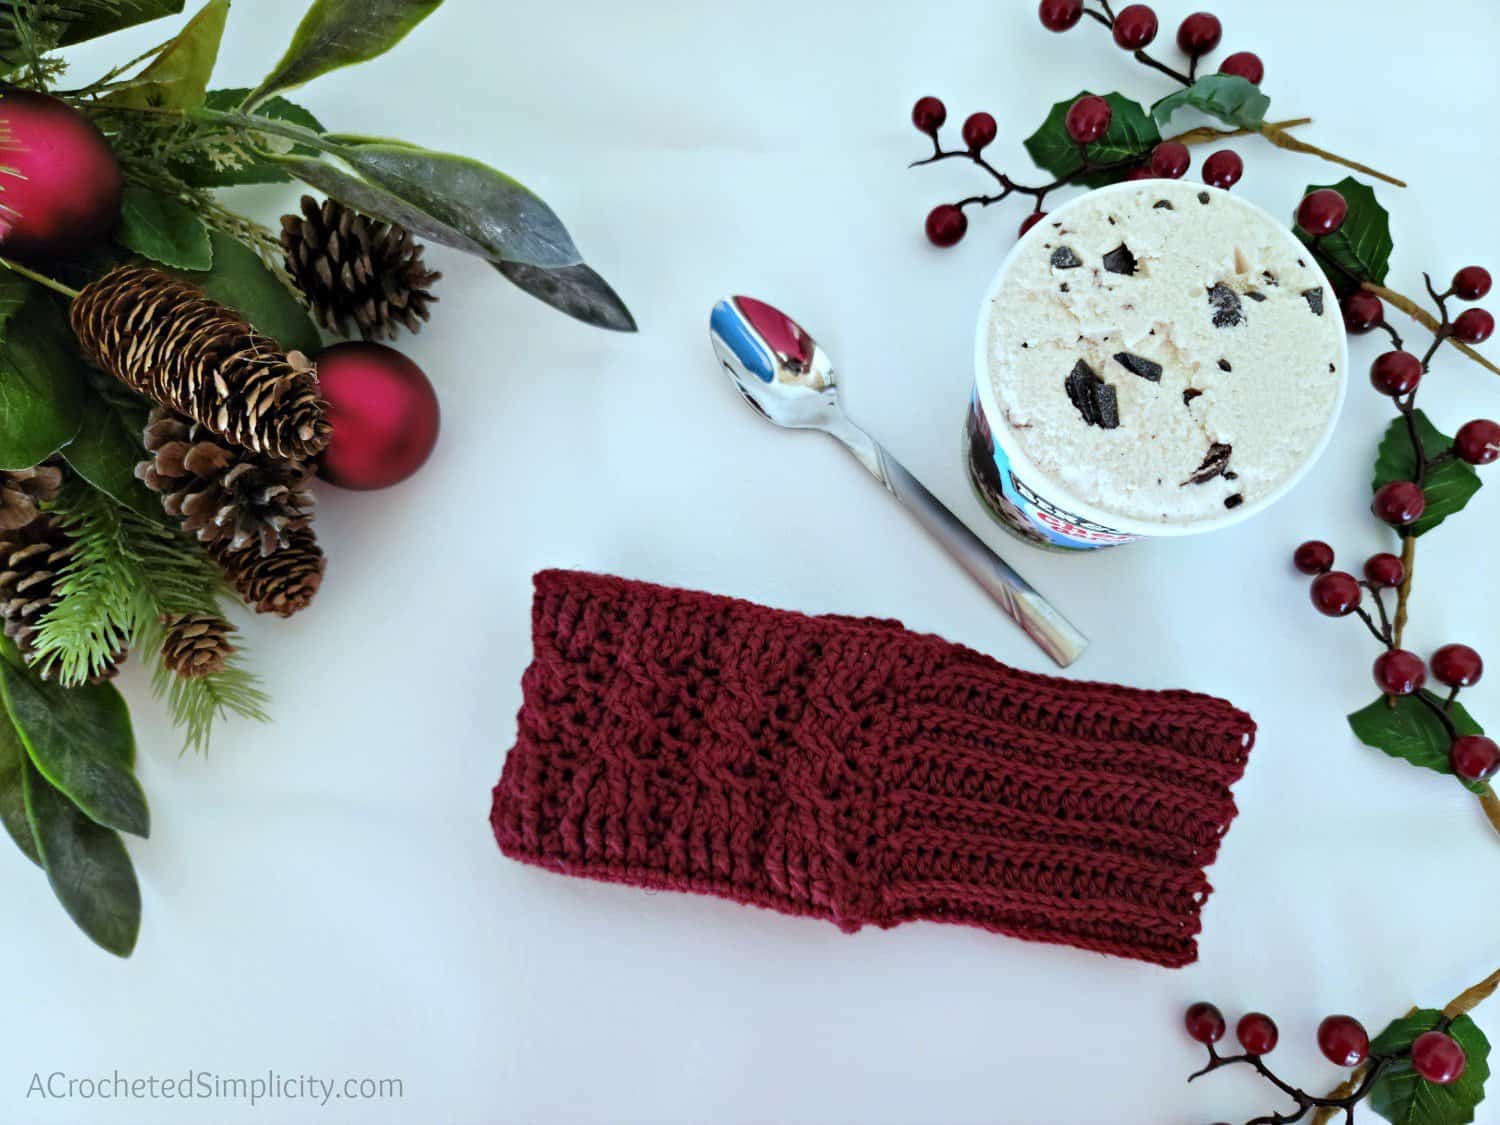 Free Crochet Drink Mitt Pattern - Cabled Sweater Ice Cream Cozy & Drink Mitt by A Crocheted Simplicity #freecrochetpattern #cozyholidaycal #crozydrinkmitt #crochetdrinkmittpattern #crochetcables